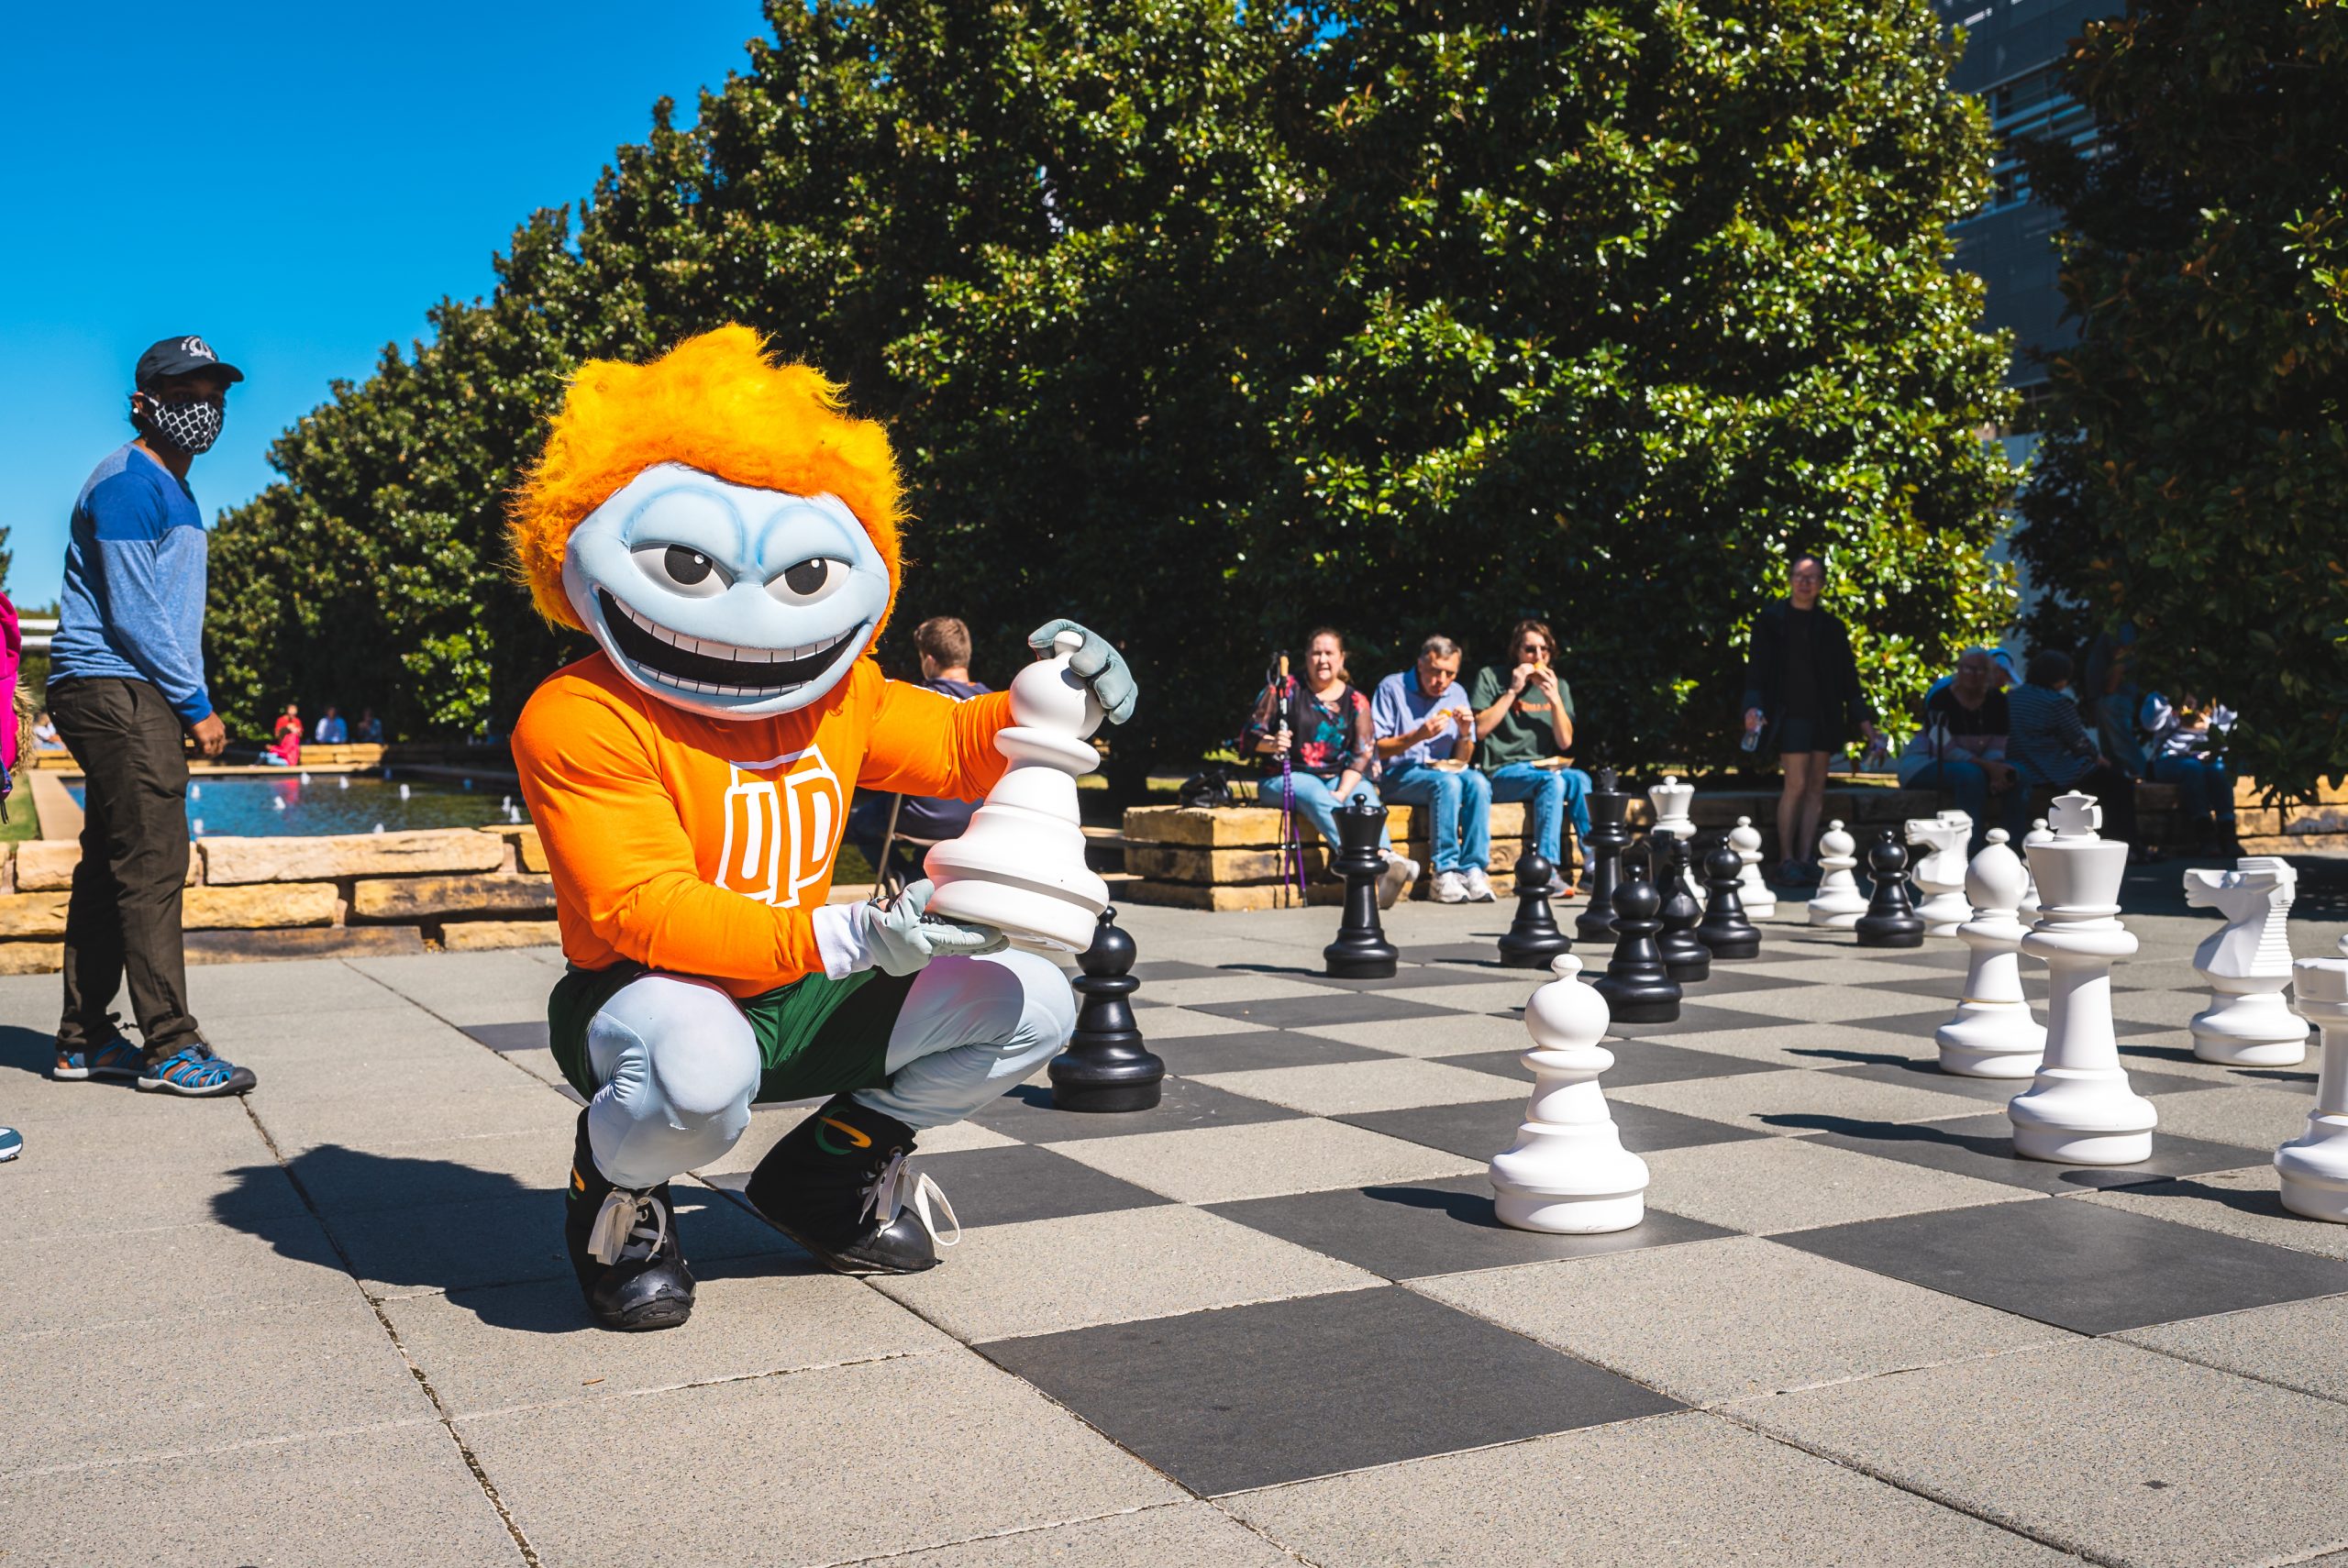 Temoc, the Official Mascot of UT Dallas, playing Chess on campus.